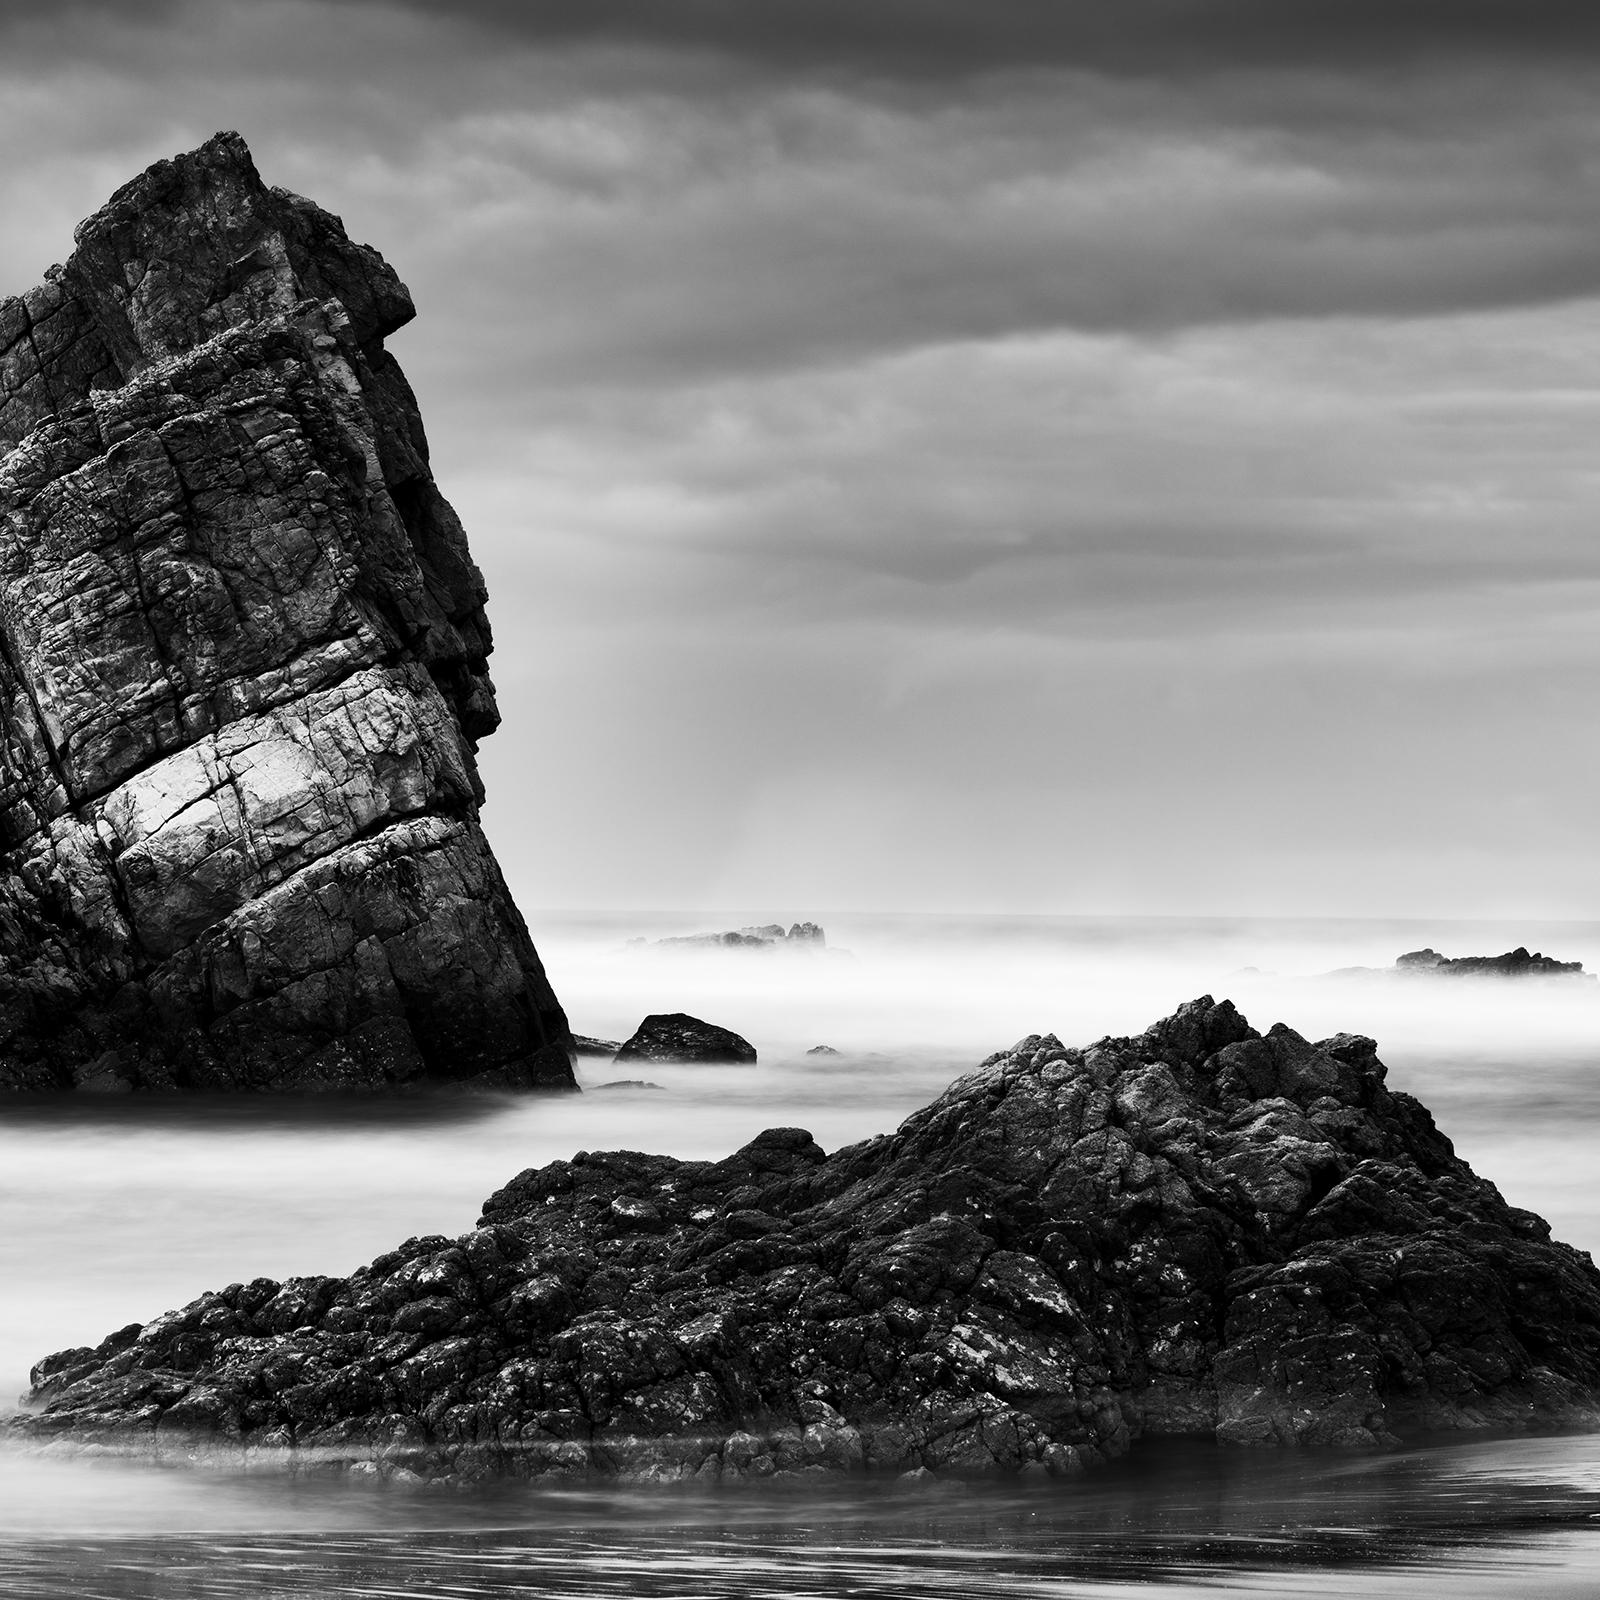 Bay of Biscay, shoreline, beach, Spain, black and white landscape photography For Sale 5